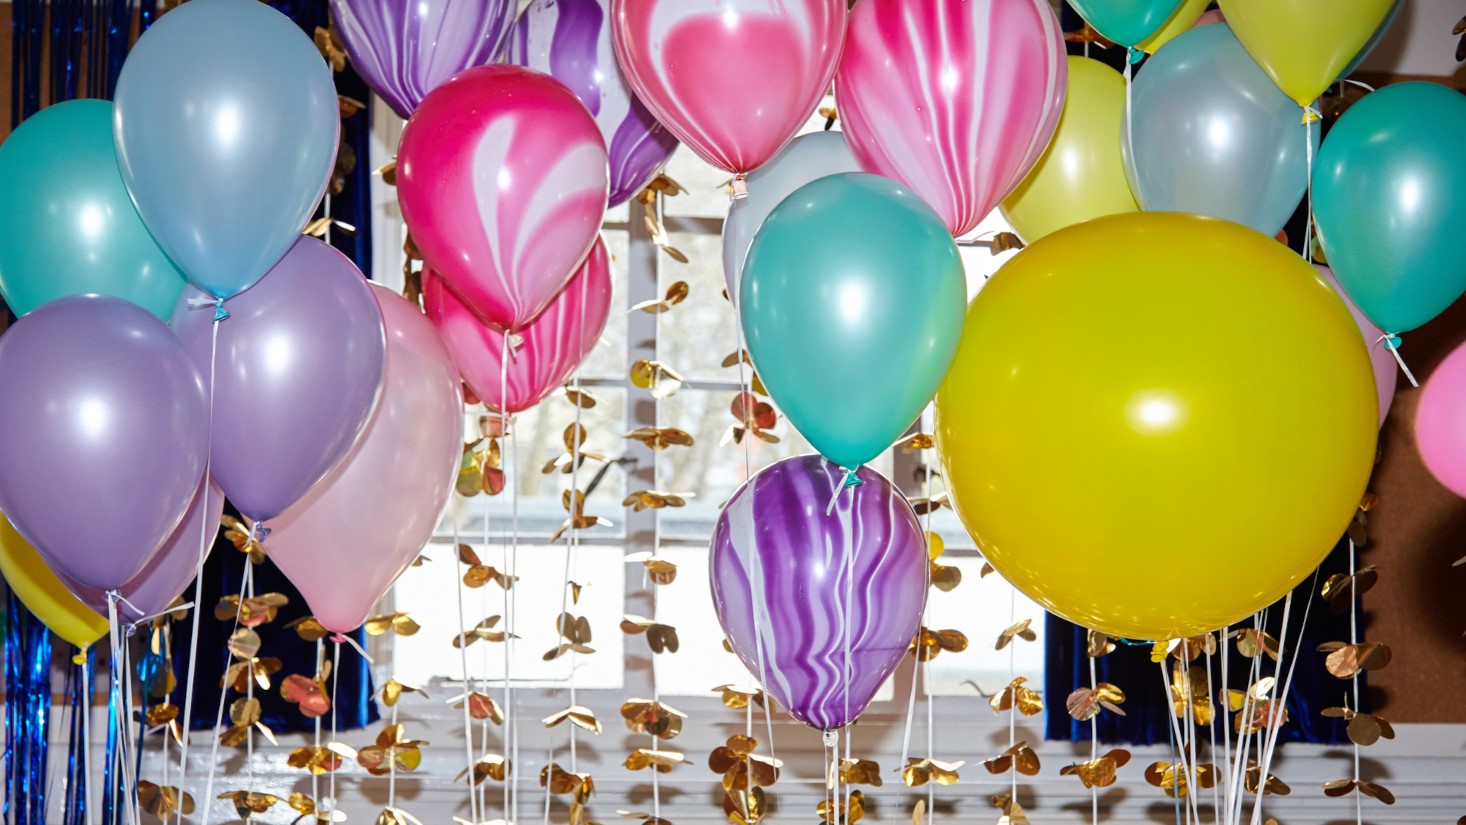 How To Make Balloons Float Without Helium